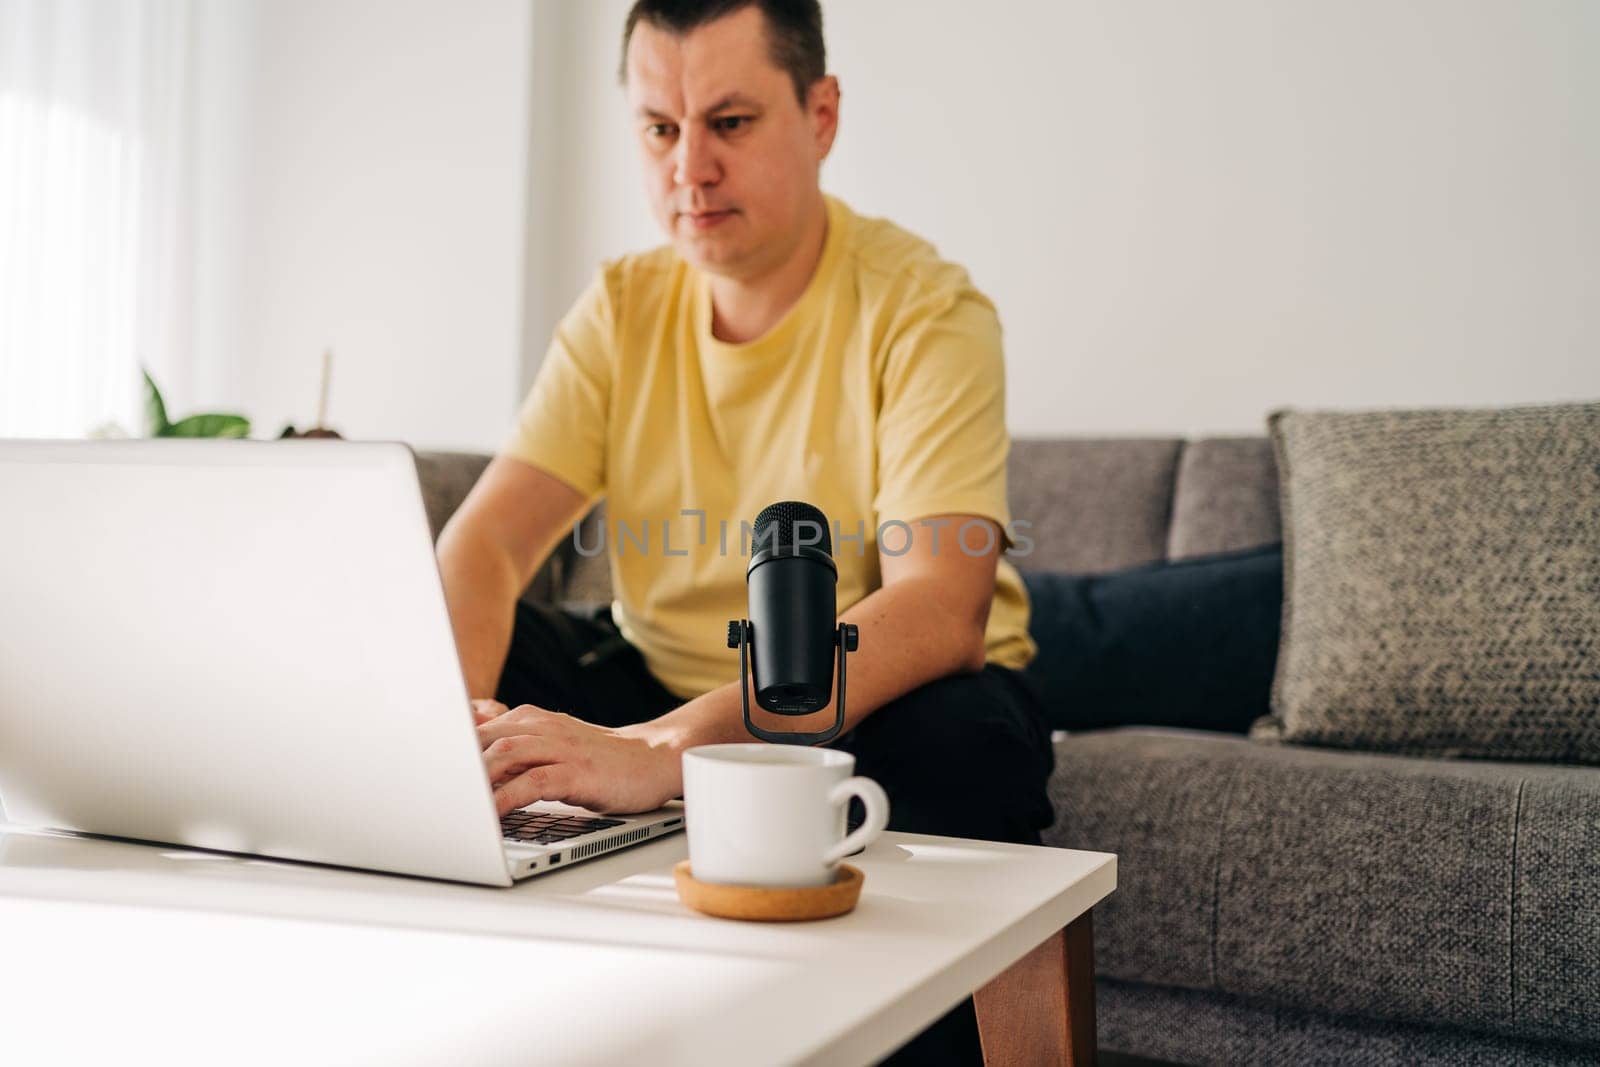 IT freelancer men with microphone typing in laptop working from home office. Programmers sitting on couch doing code review. Distance learning online education and work.